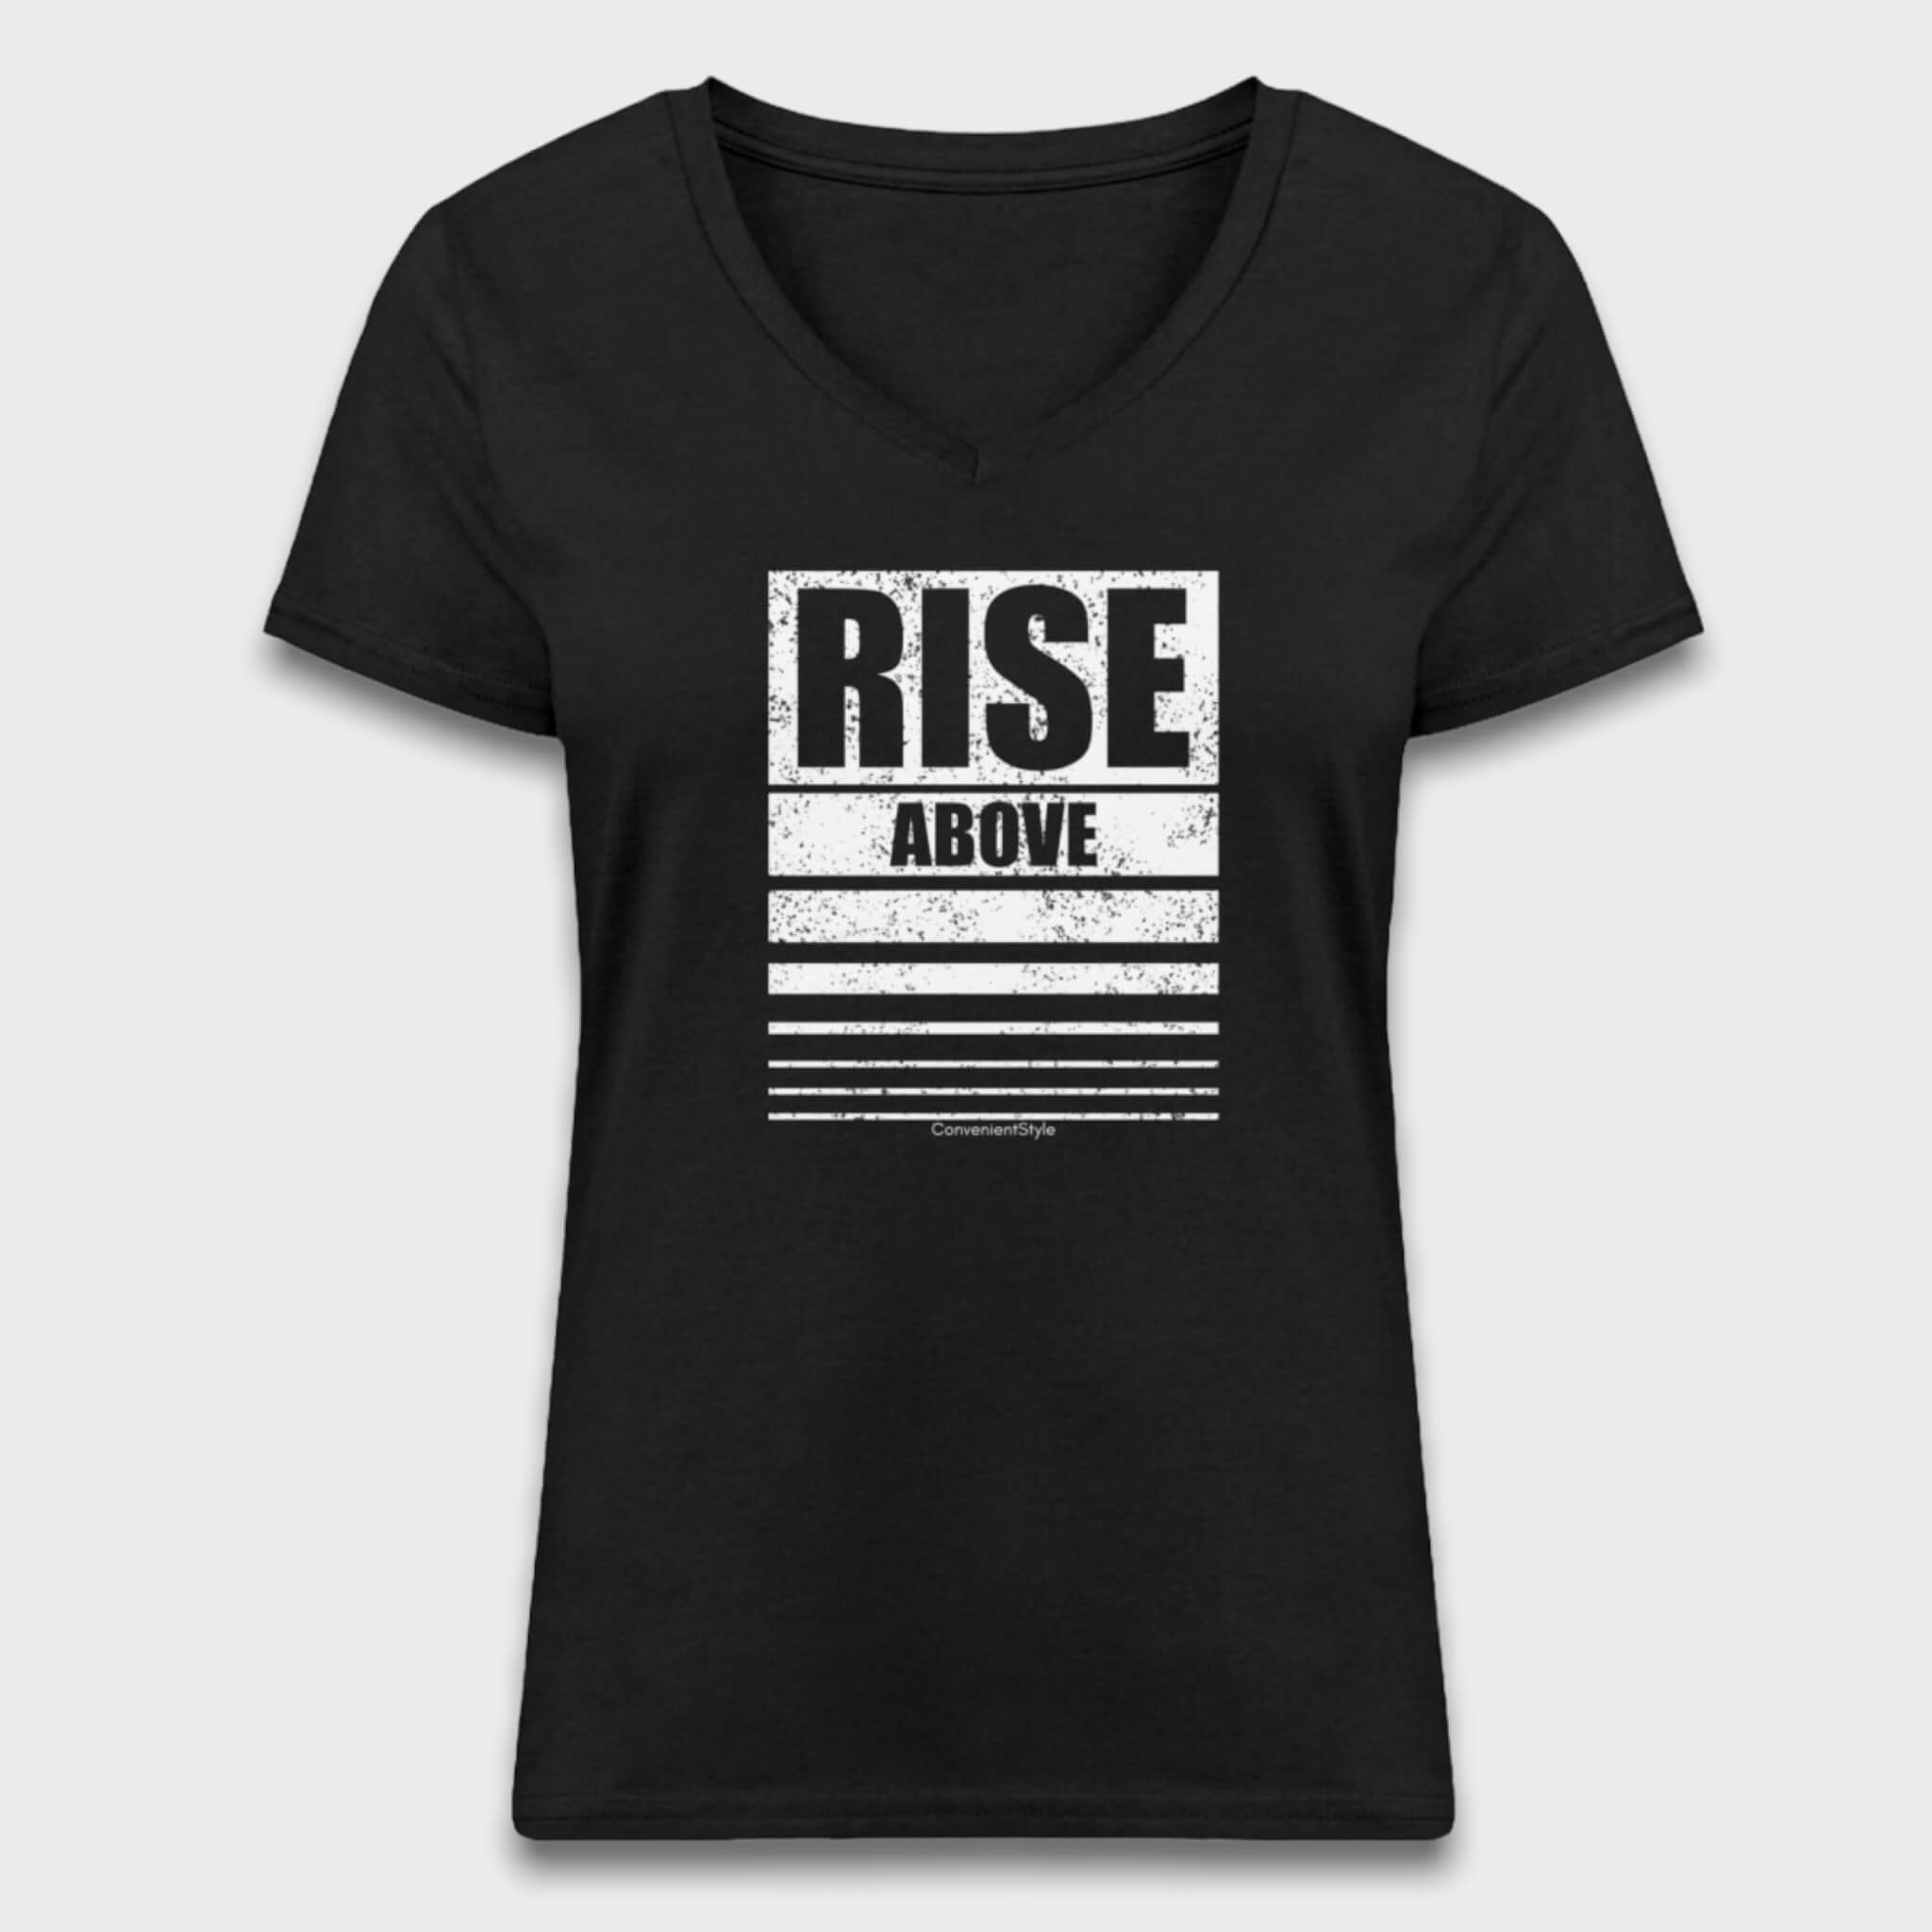 Rise above